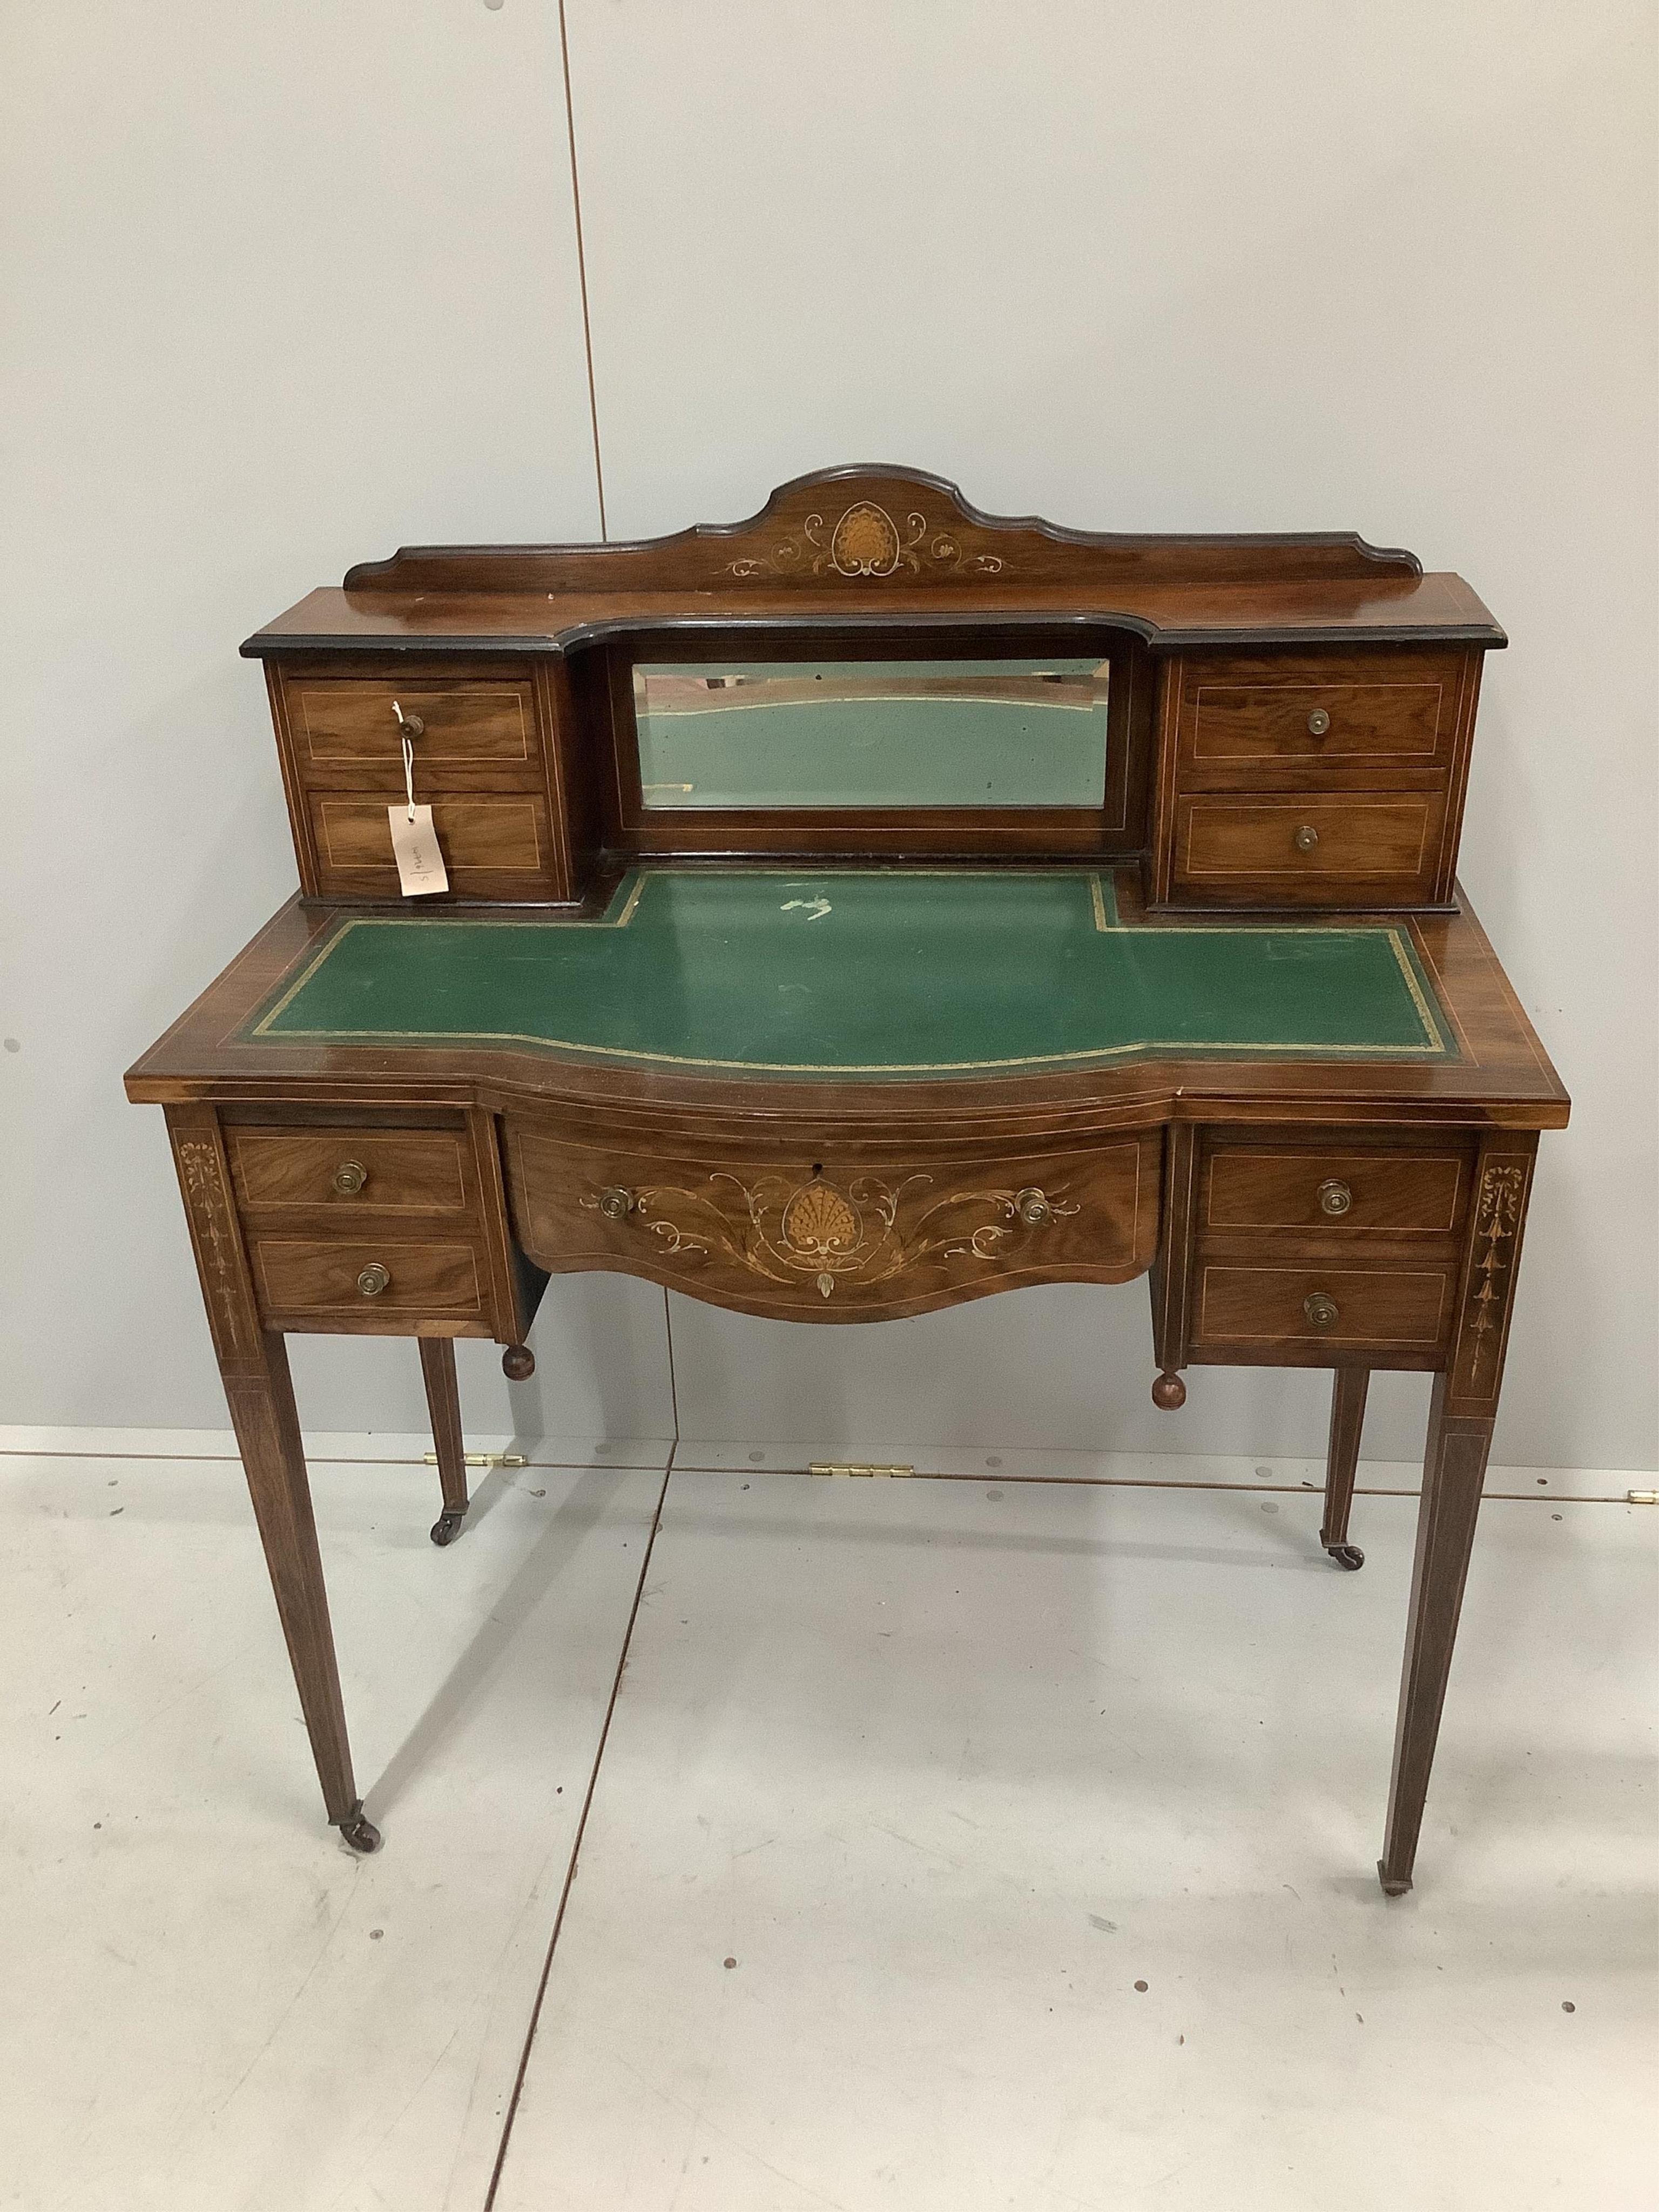 An Edwardian marquetry inlaid rosewood bow front kneehole desk, width 91cm, depth 47cm, height 101cm. Condition - fair